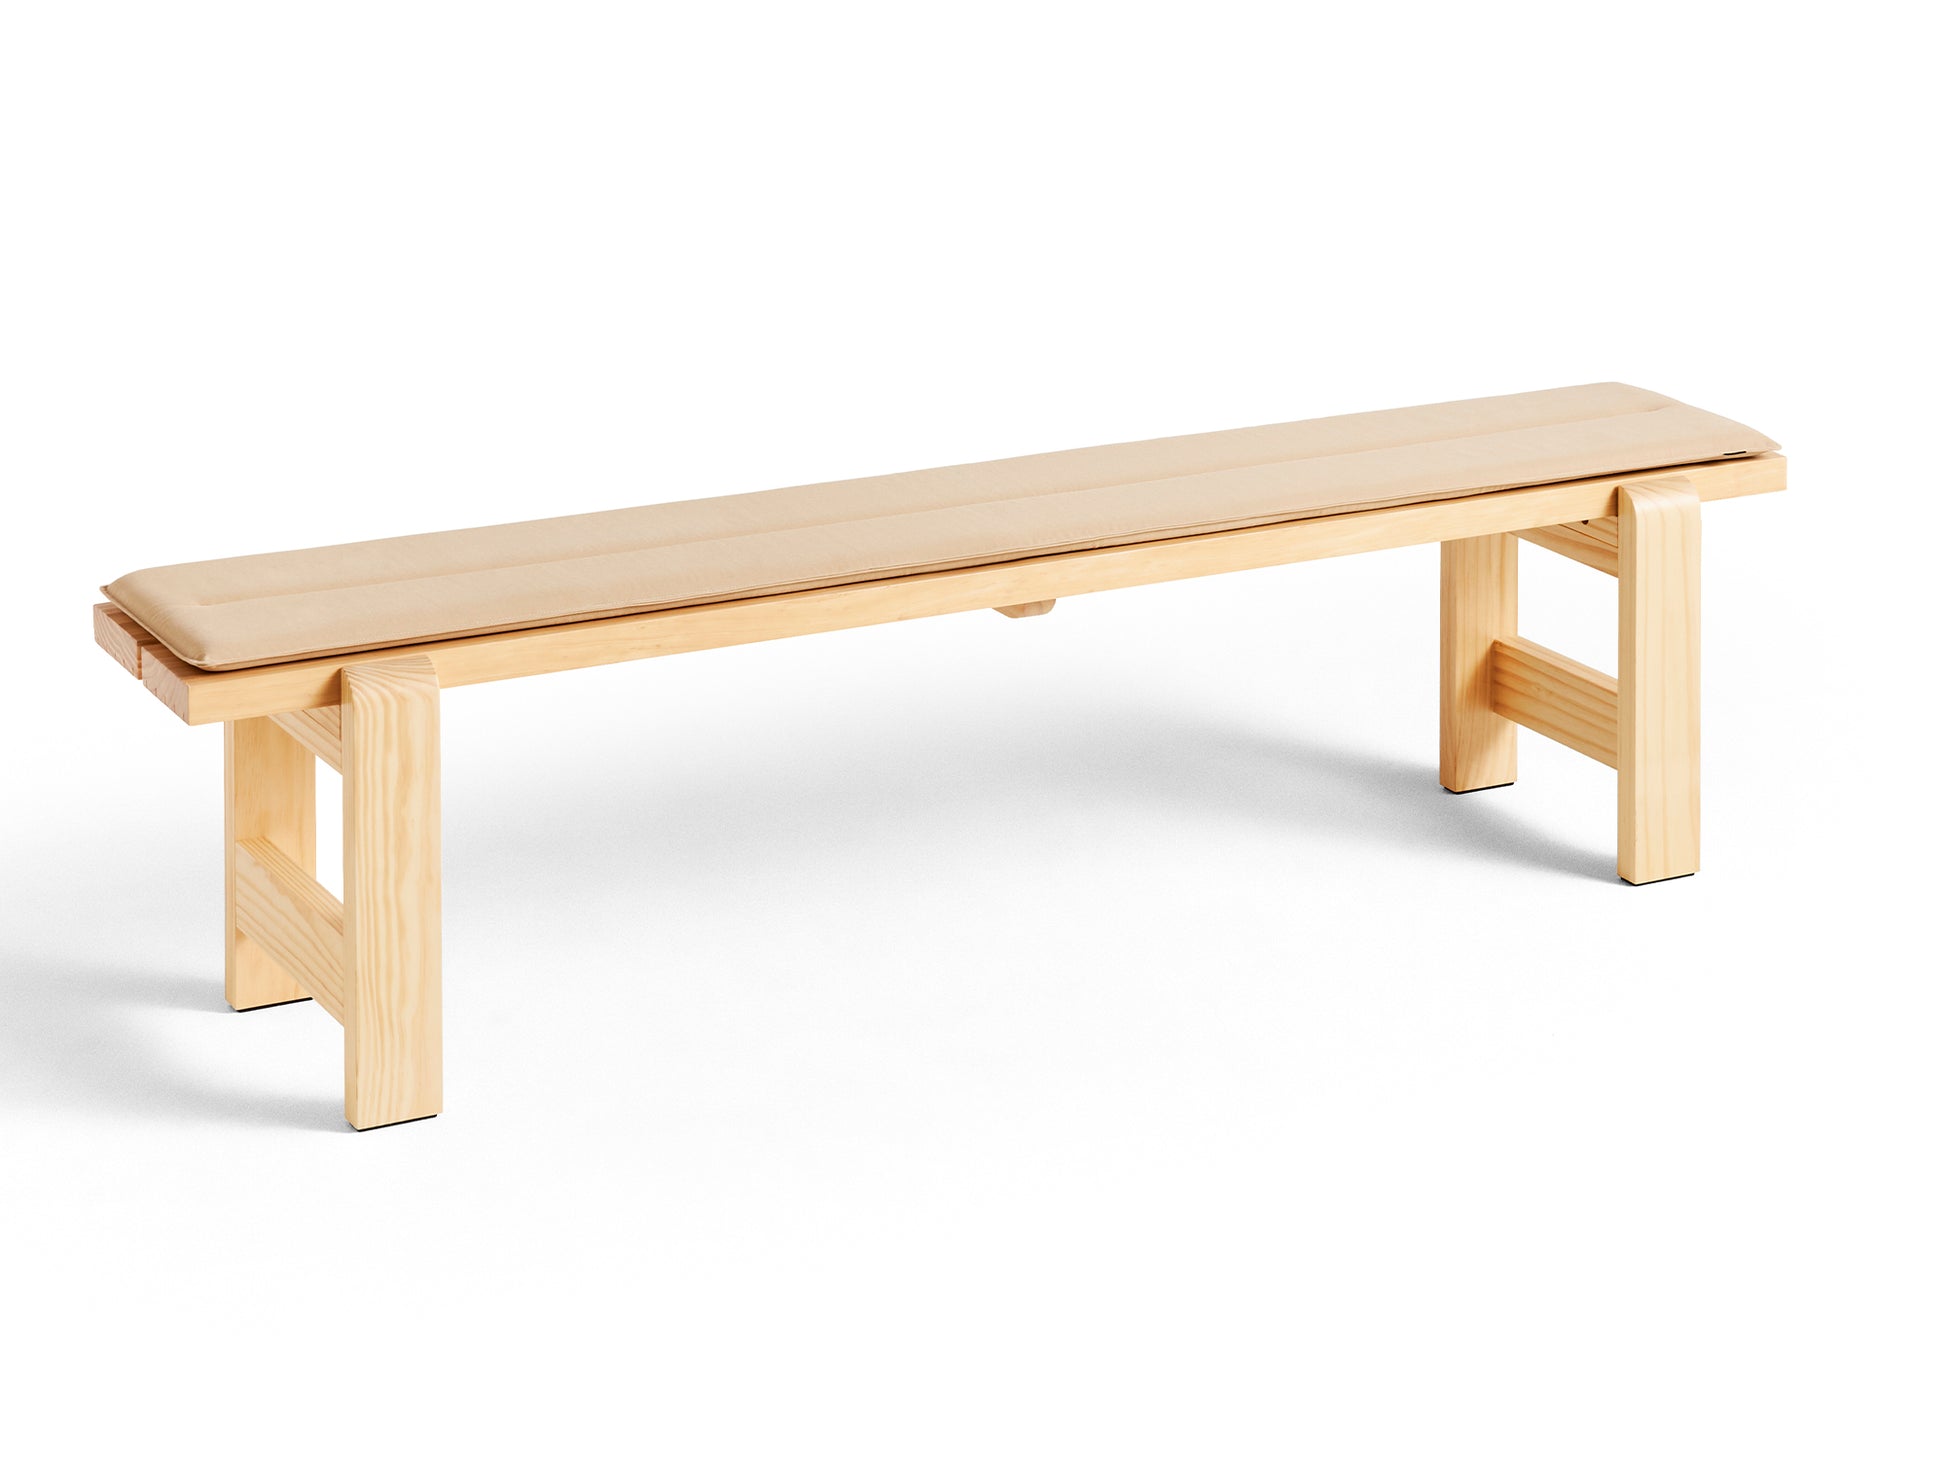 Weekday Bench with Cushion by HAY - Length: 190 cm / Lacquered Pinewood